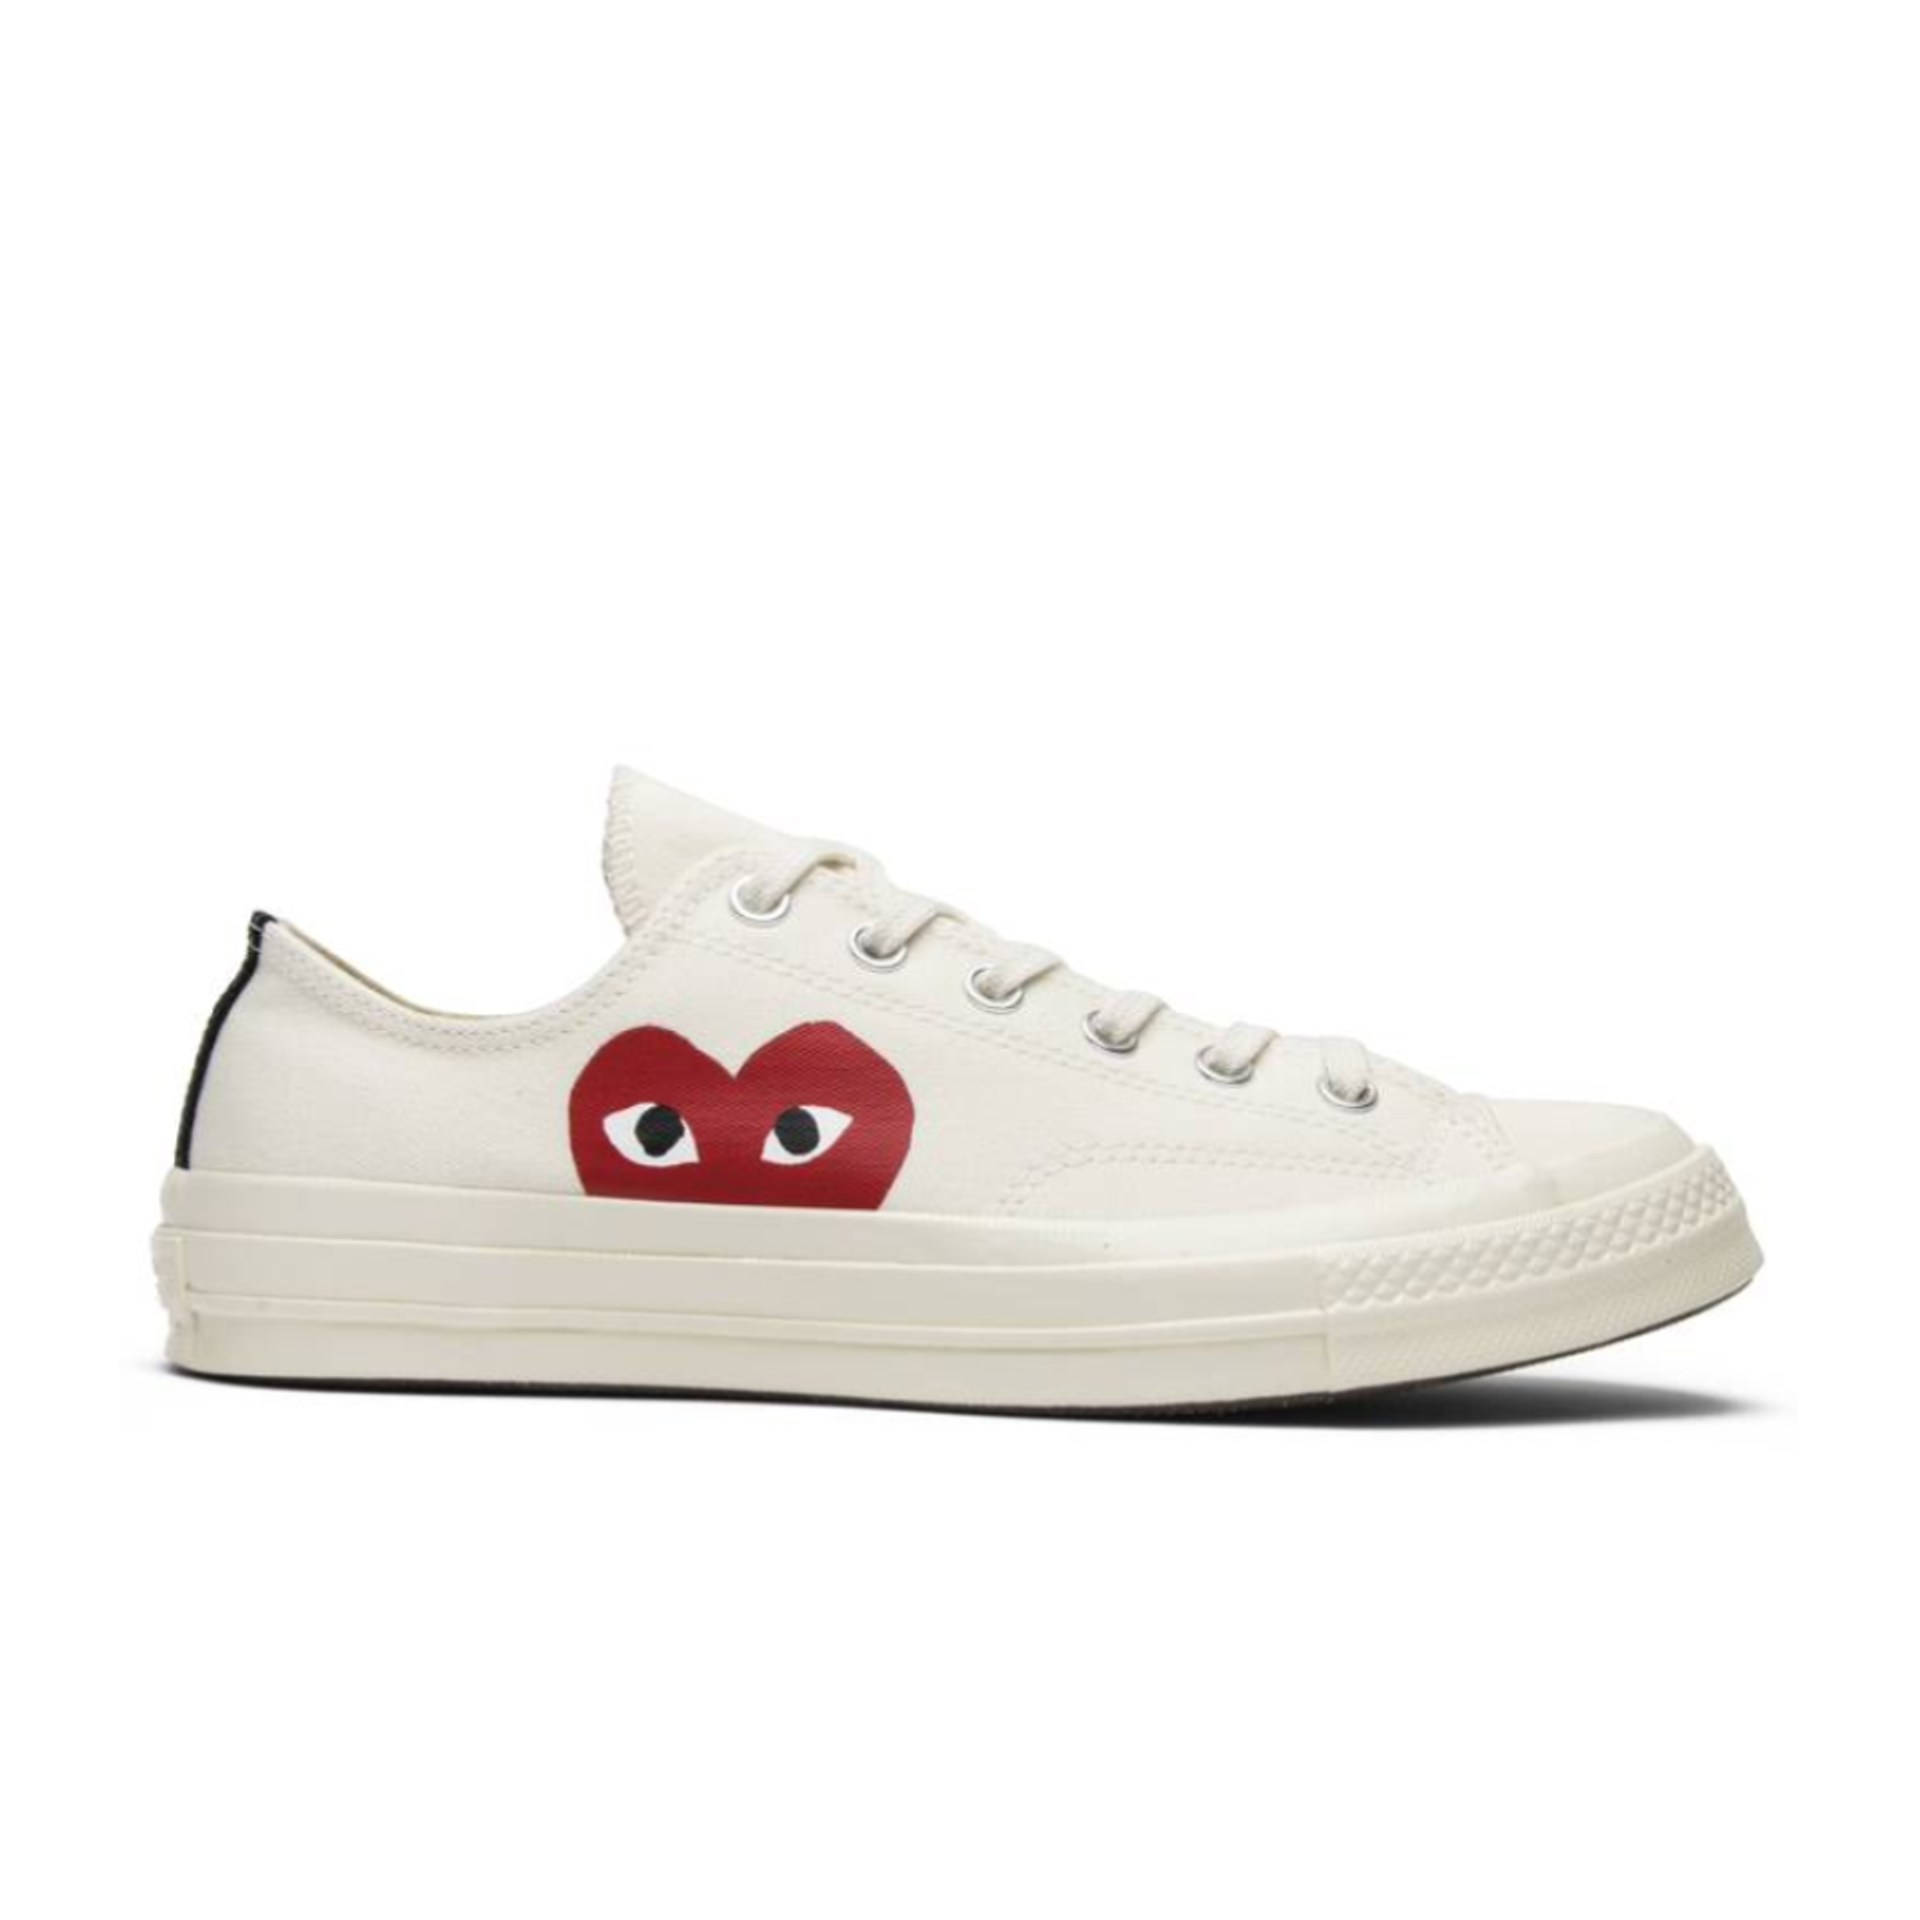 Comme des Garcons x Chuck 70 Ox 'Play'